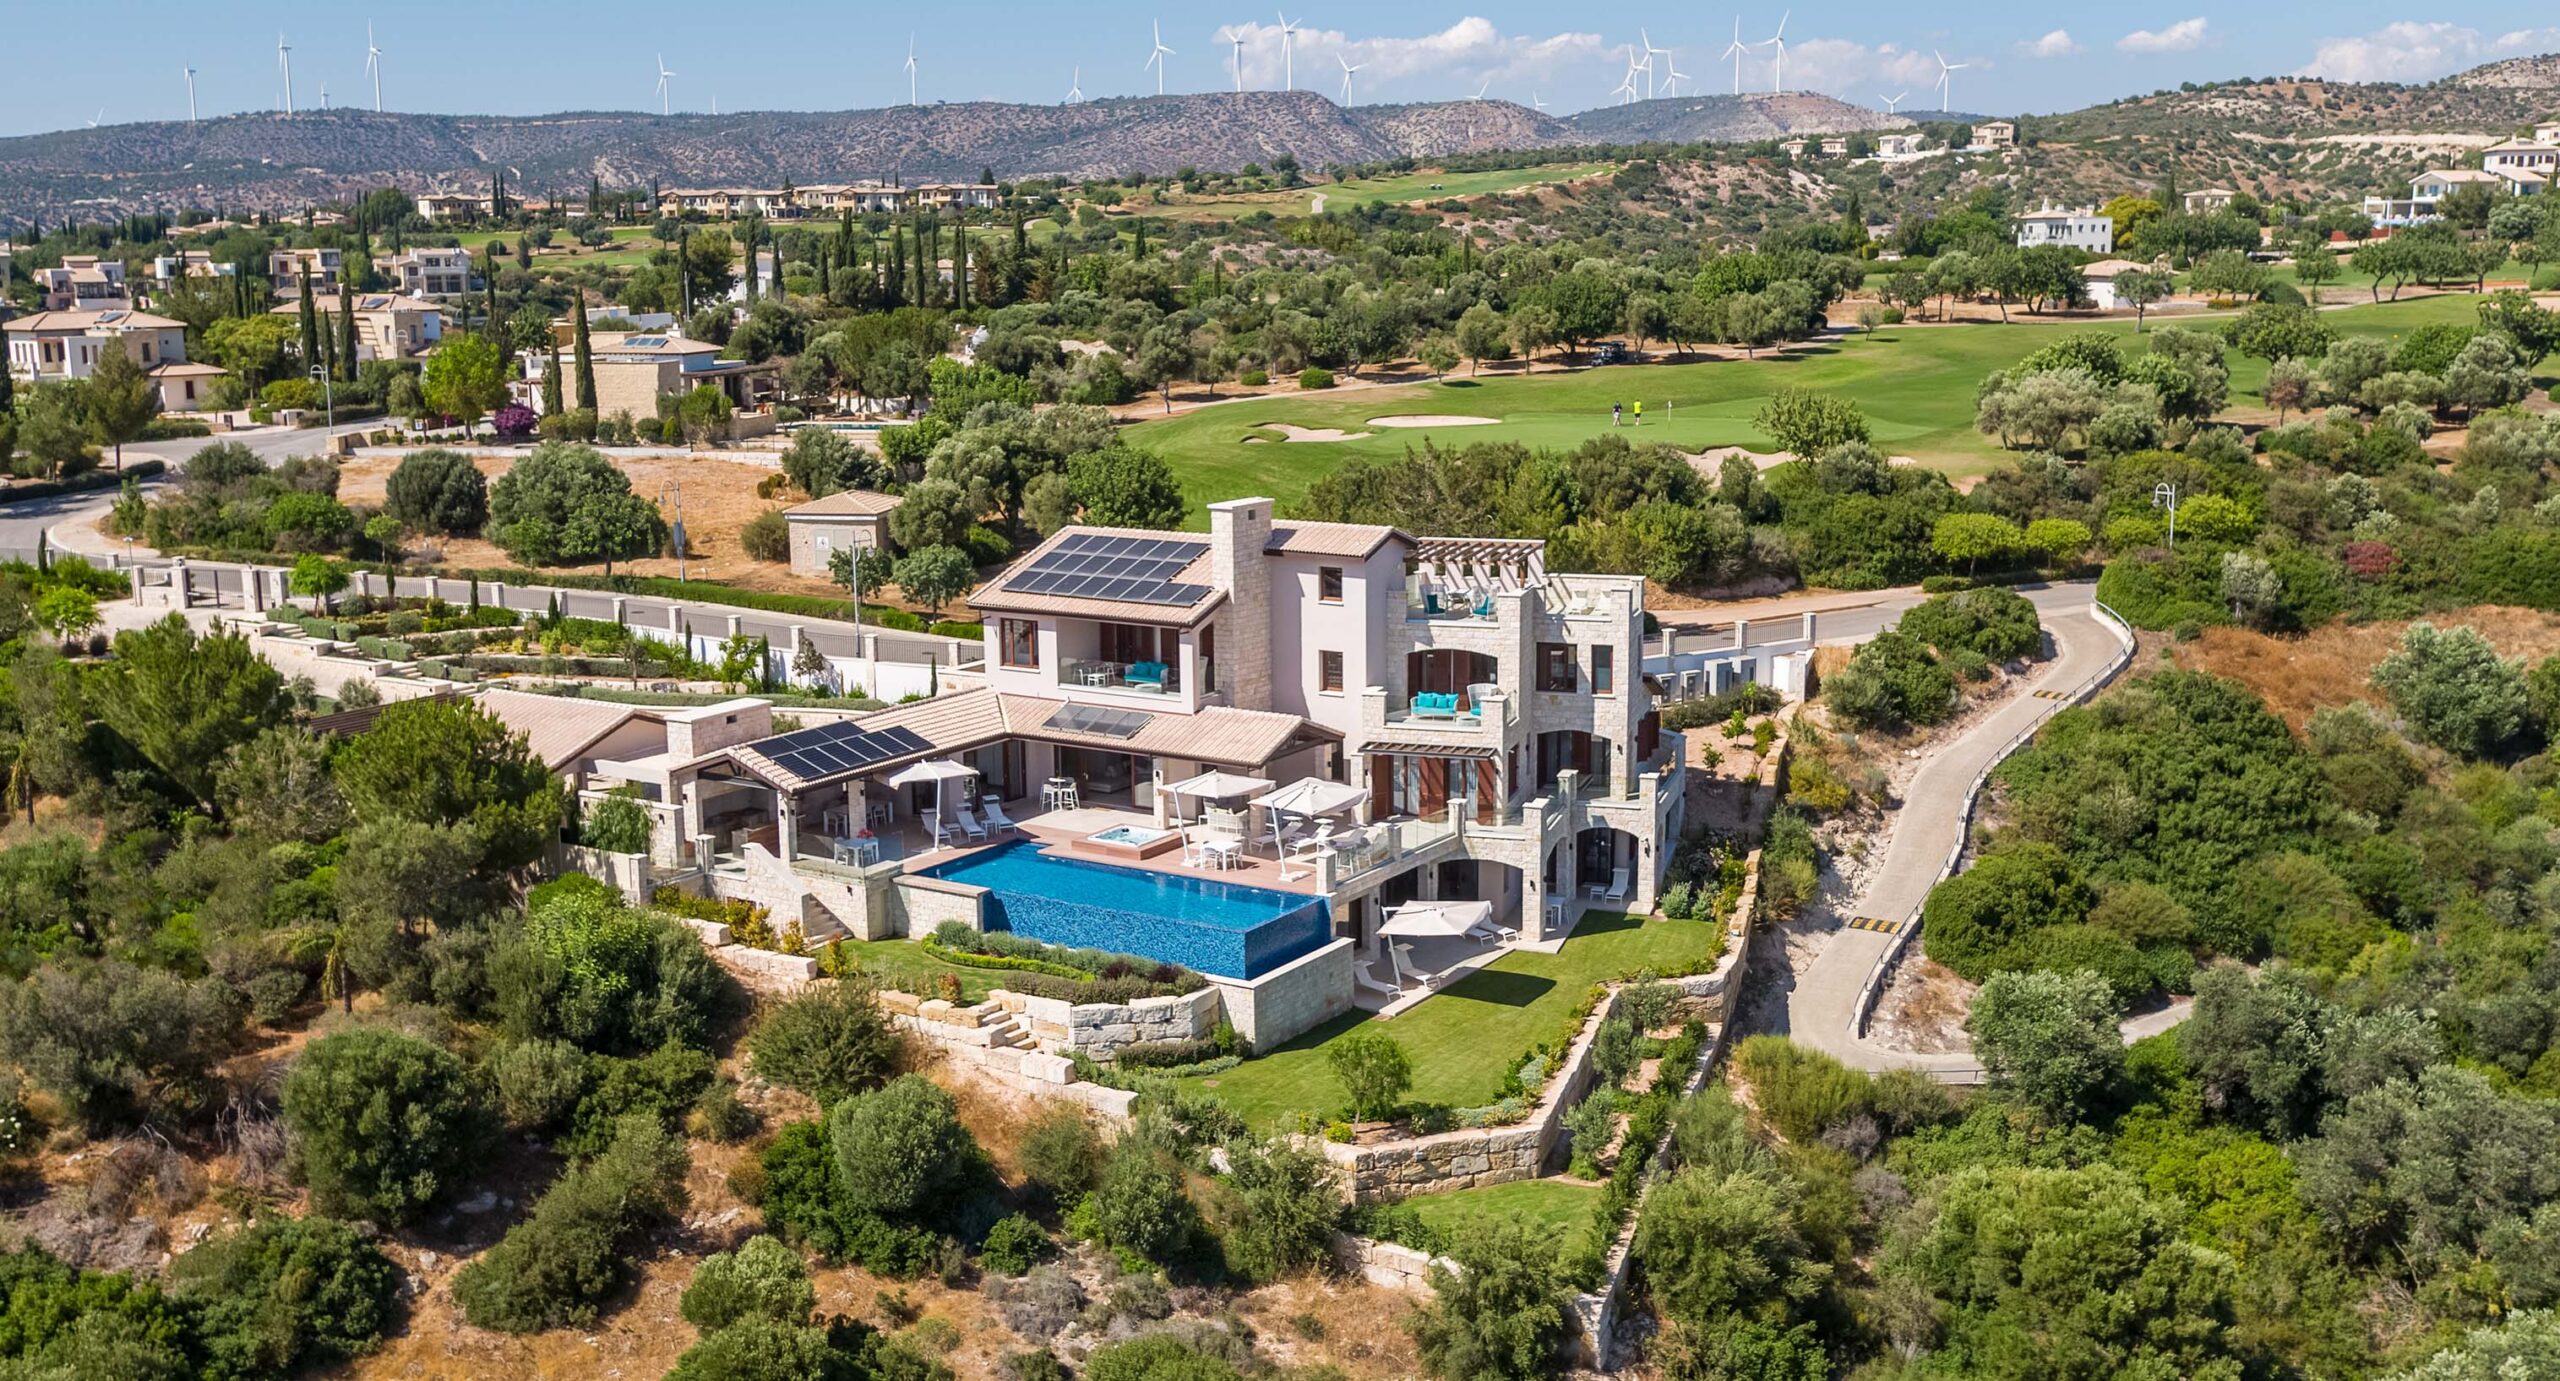 Aerial view of Villa 102 on Aphrodite Hills, facing the front with pool, terraces, whole villa building, surrounding ground in view. Back drop shows golf course and mountain views.